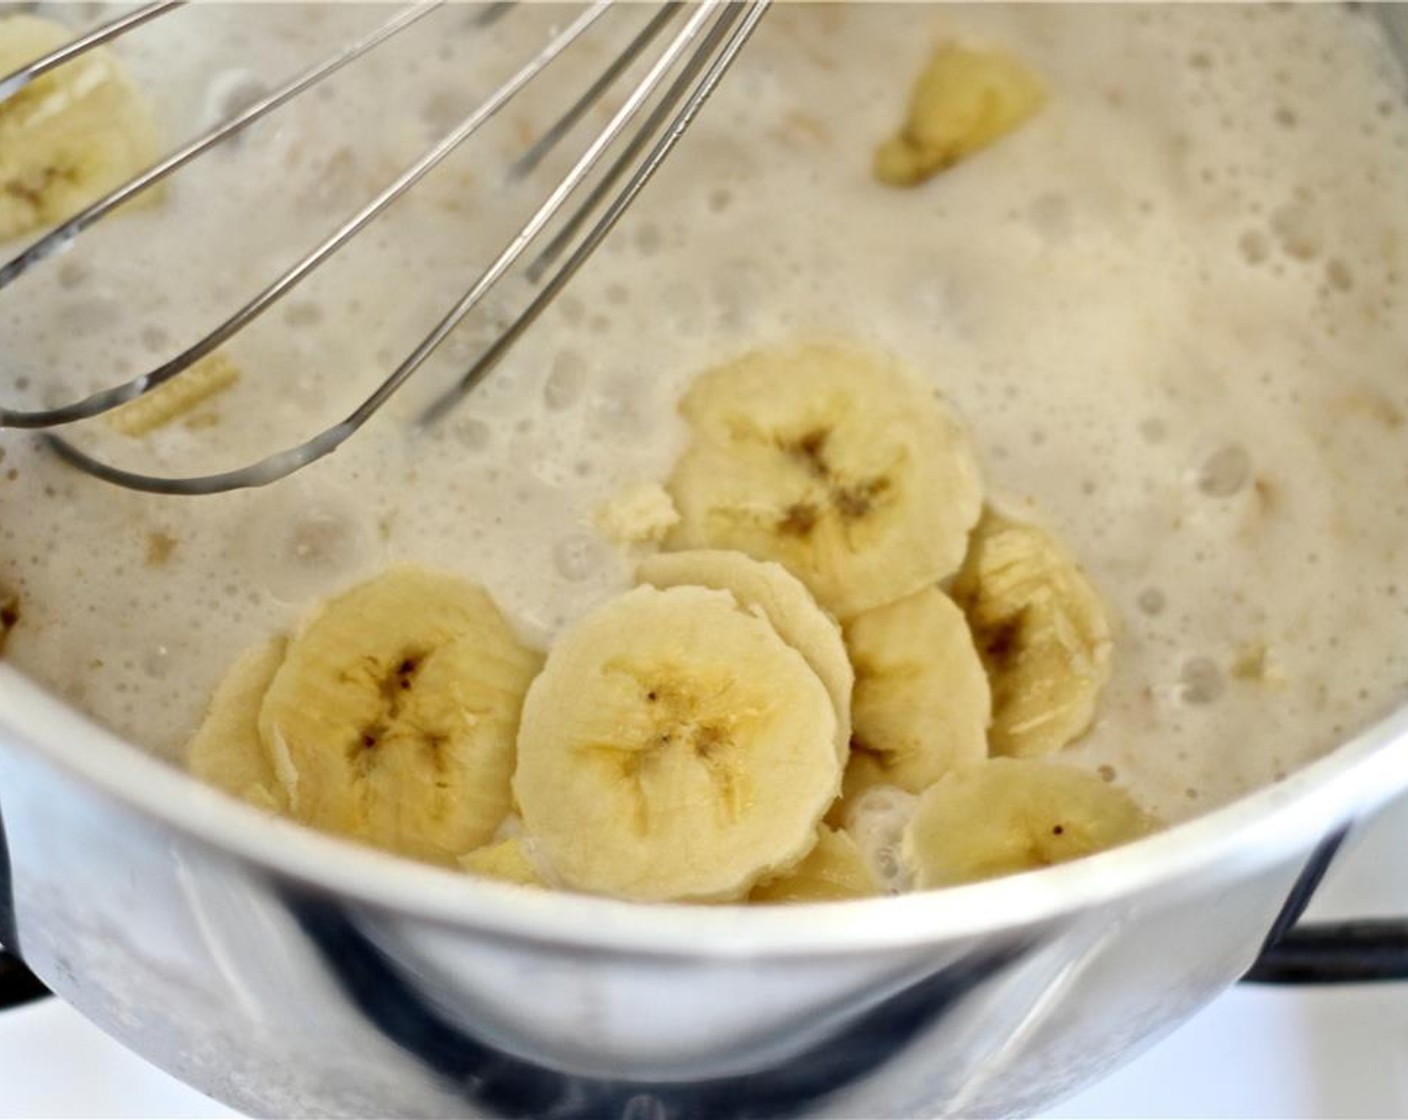 step 2 Thinly slice the medium Banana (1/2) and whisk it in, "whipping" the oatmeal to a creamy texture. Add more milk if needed to achieve the desired consistency. Continue cooking for another 3-5 minutes, or until the oats are creamy.